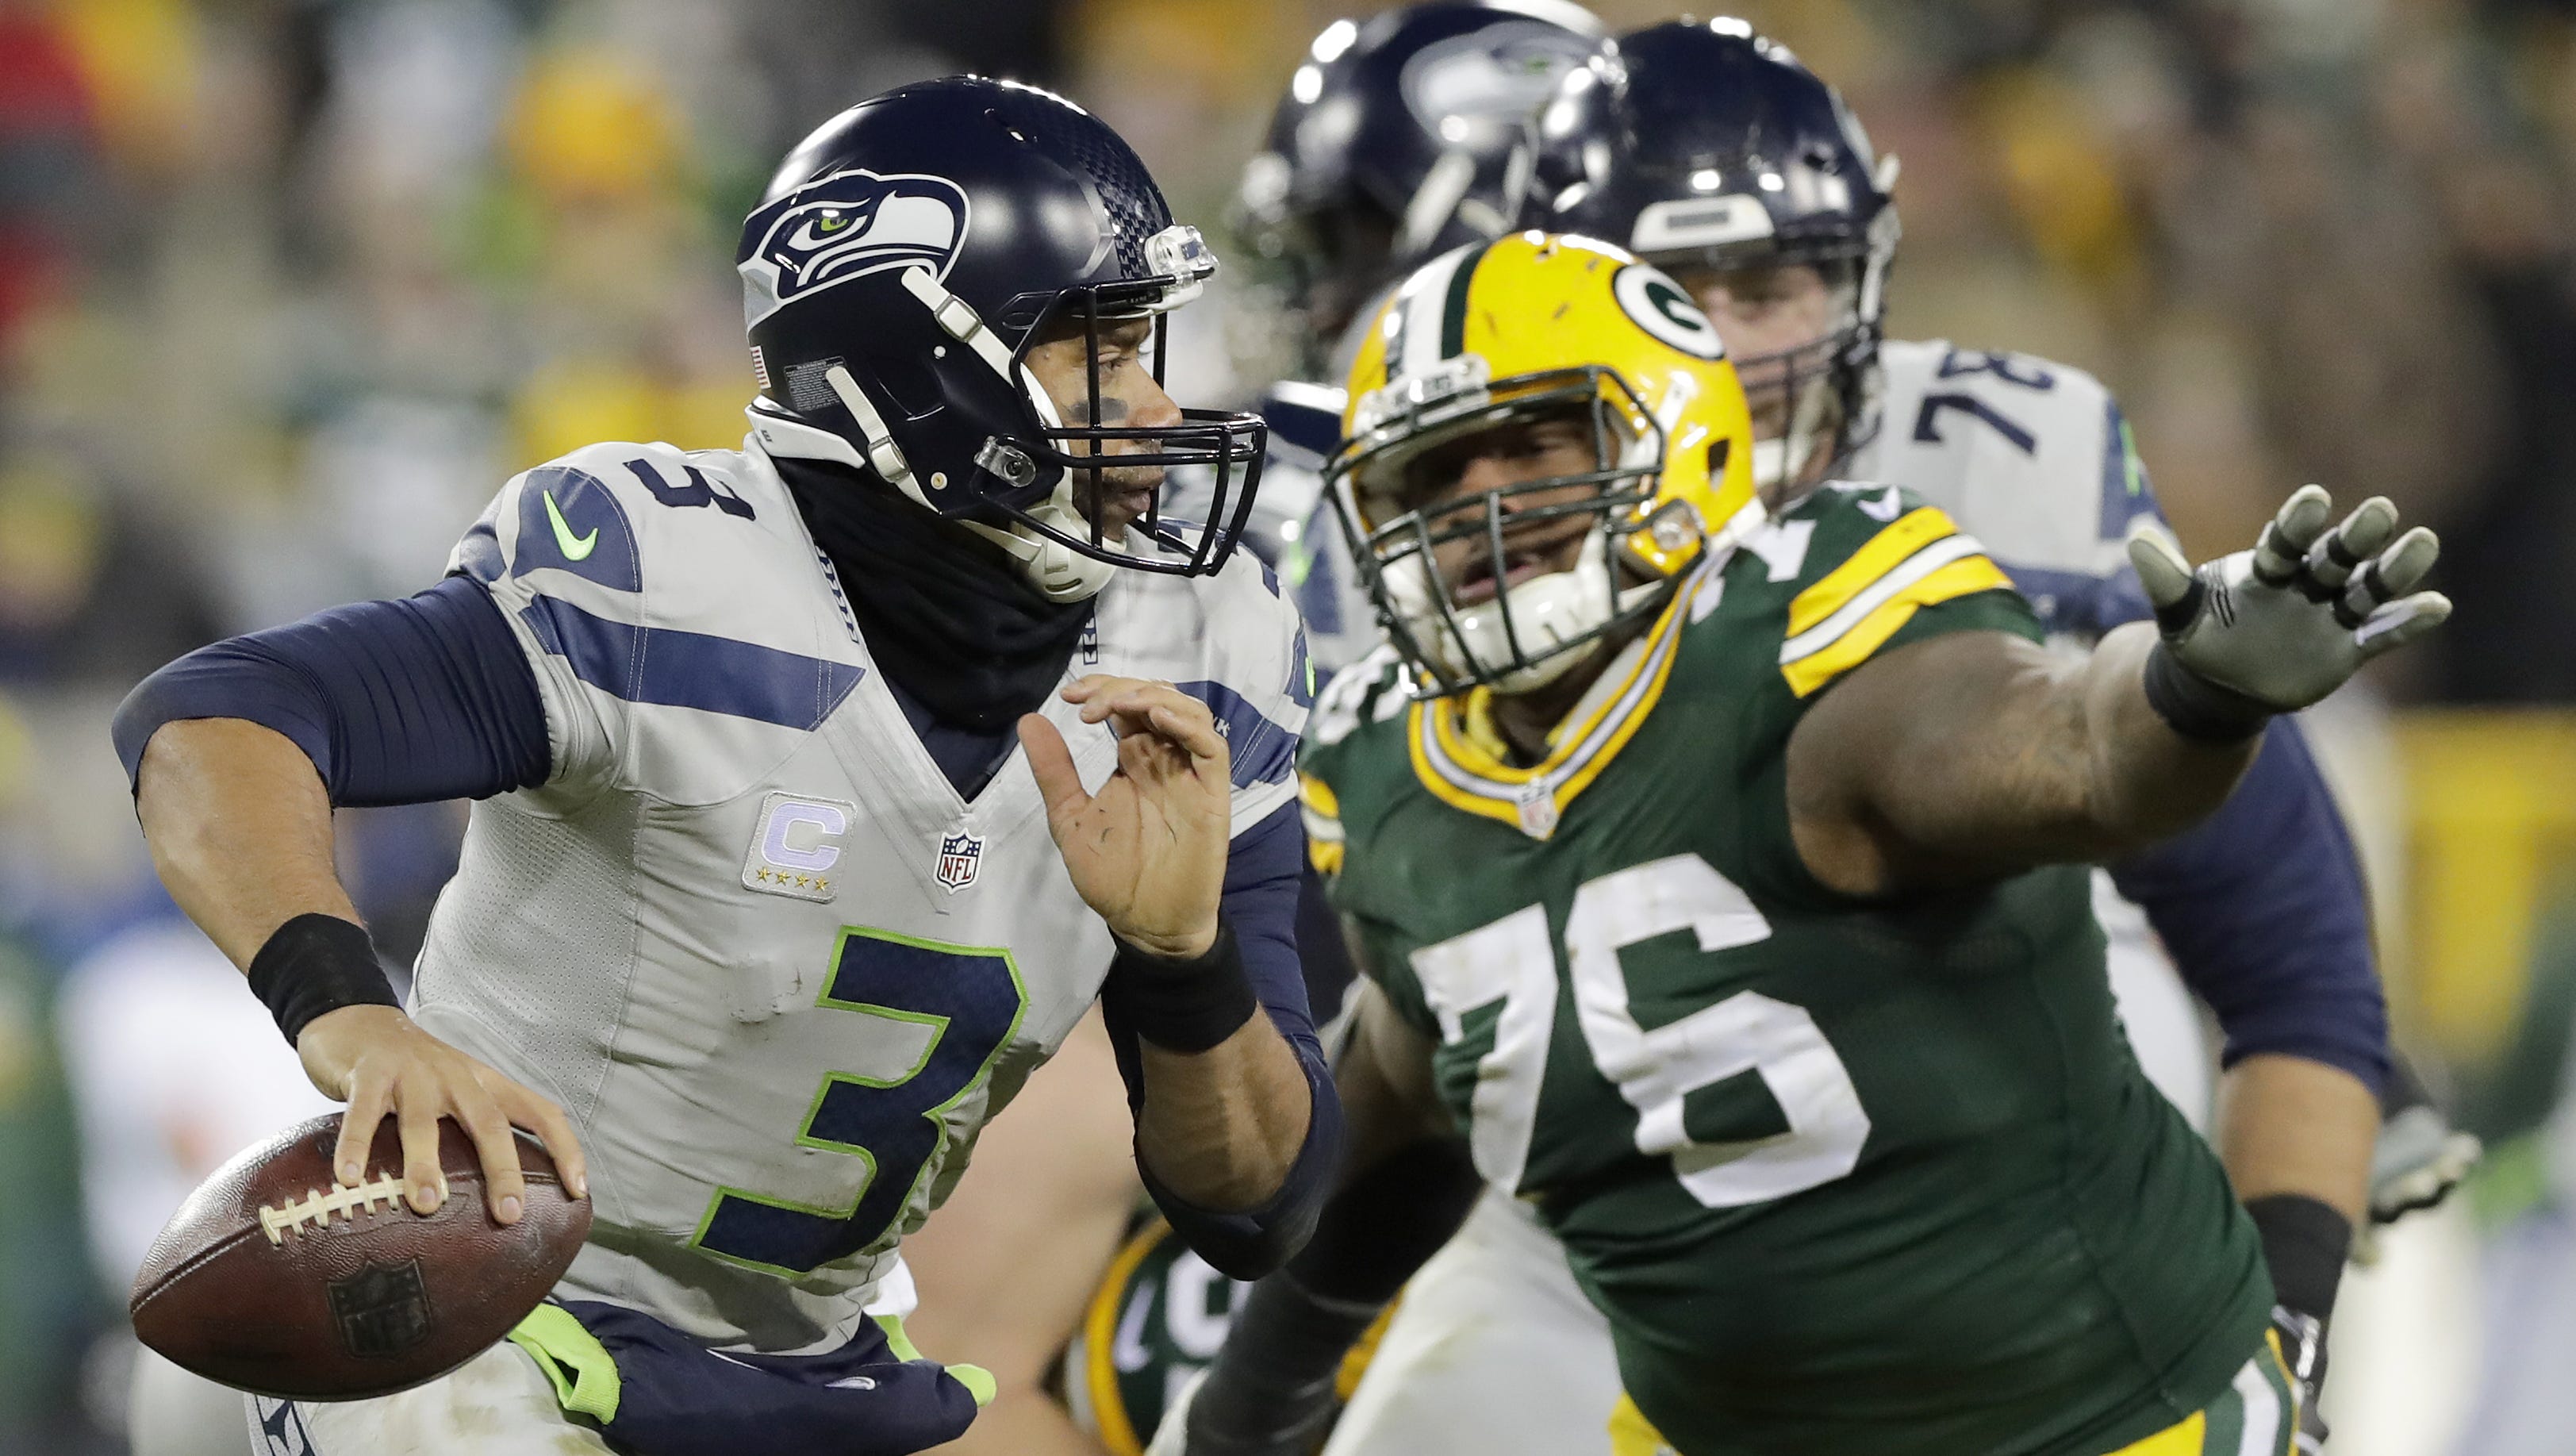 Seattle Seahawks quarterback Russell Wilson (3) scrambles away from Green Bay Packers defensive end Mike Daniels (76) in the fourth quarter on Dec. 11, 2016, at Lambeau Field in Green Bay.